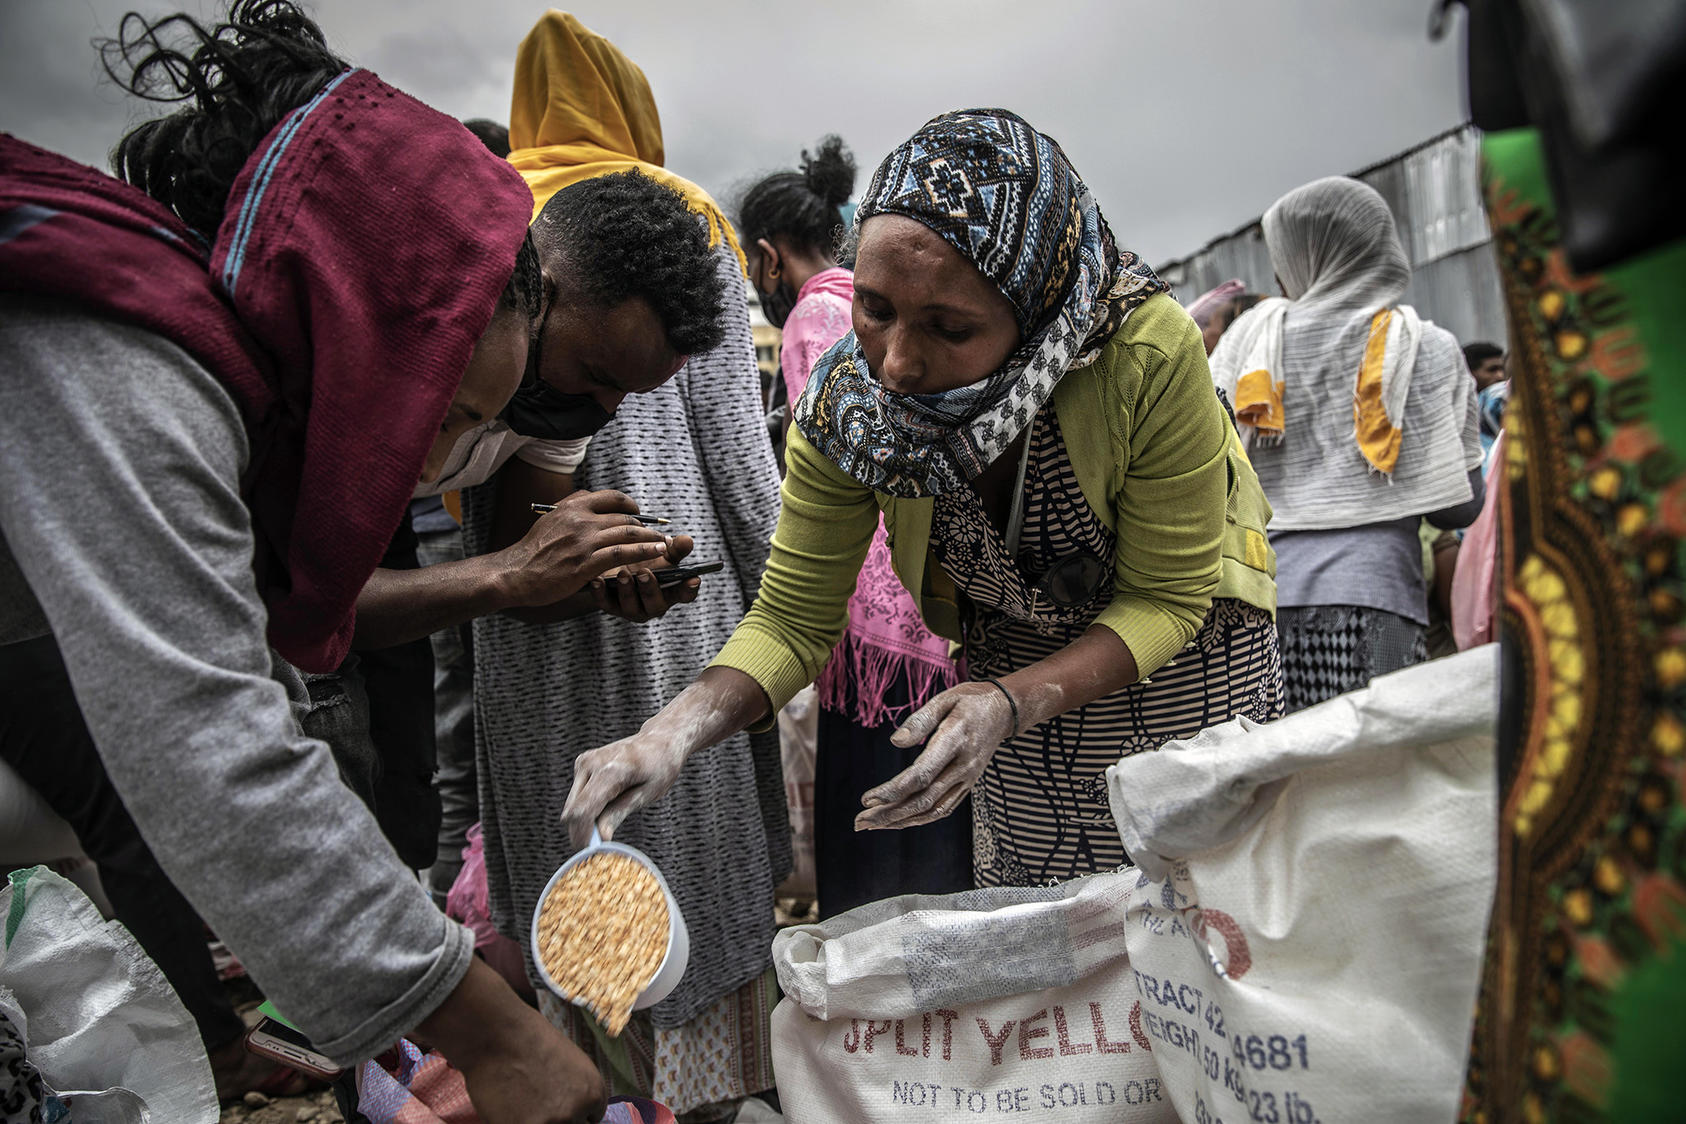 Emergency food distribution in Mekelle, the capital of Ethiopia’s Tigray region, on June 26, 2021. (Finbarr O'Reilly/The New York Times)